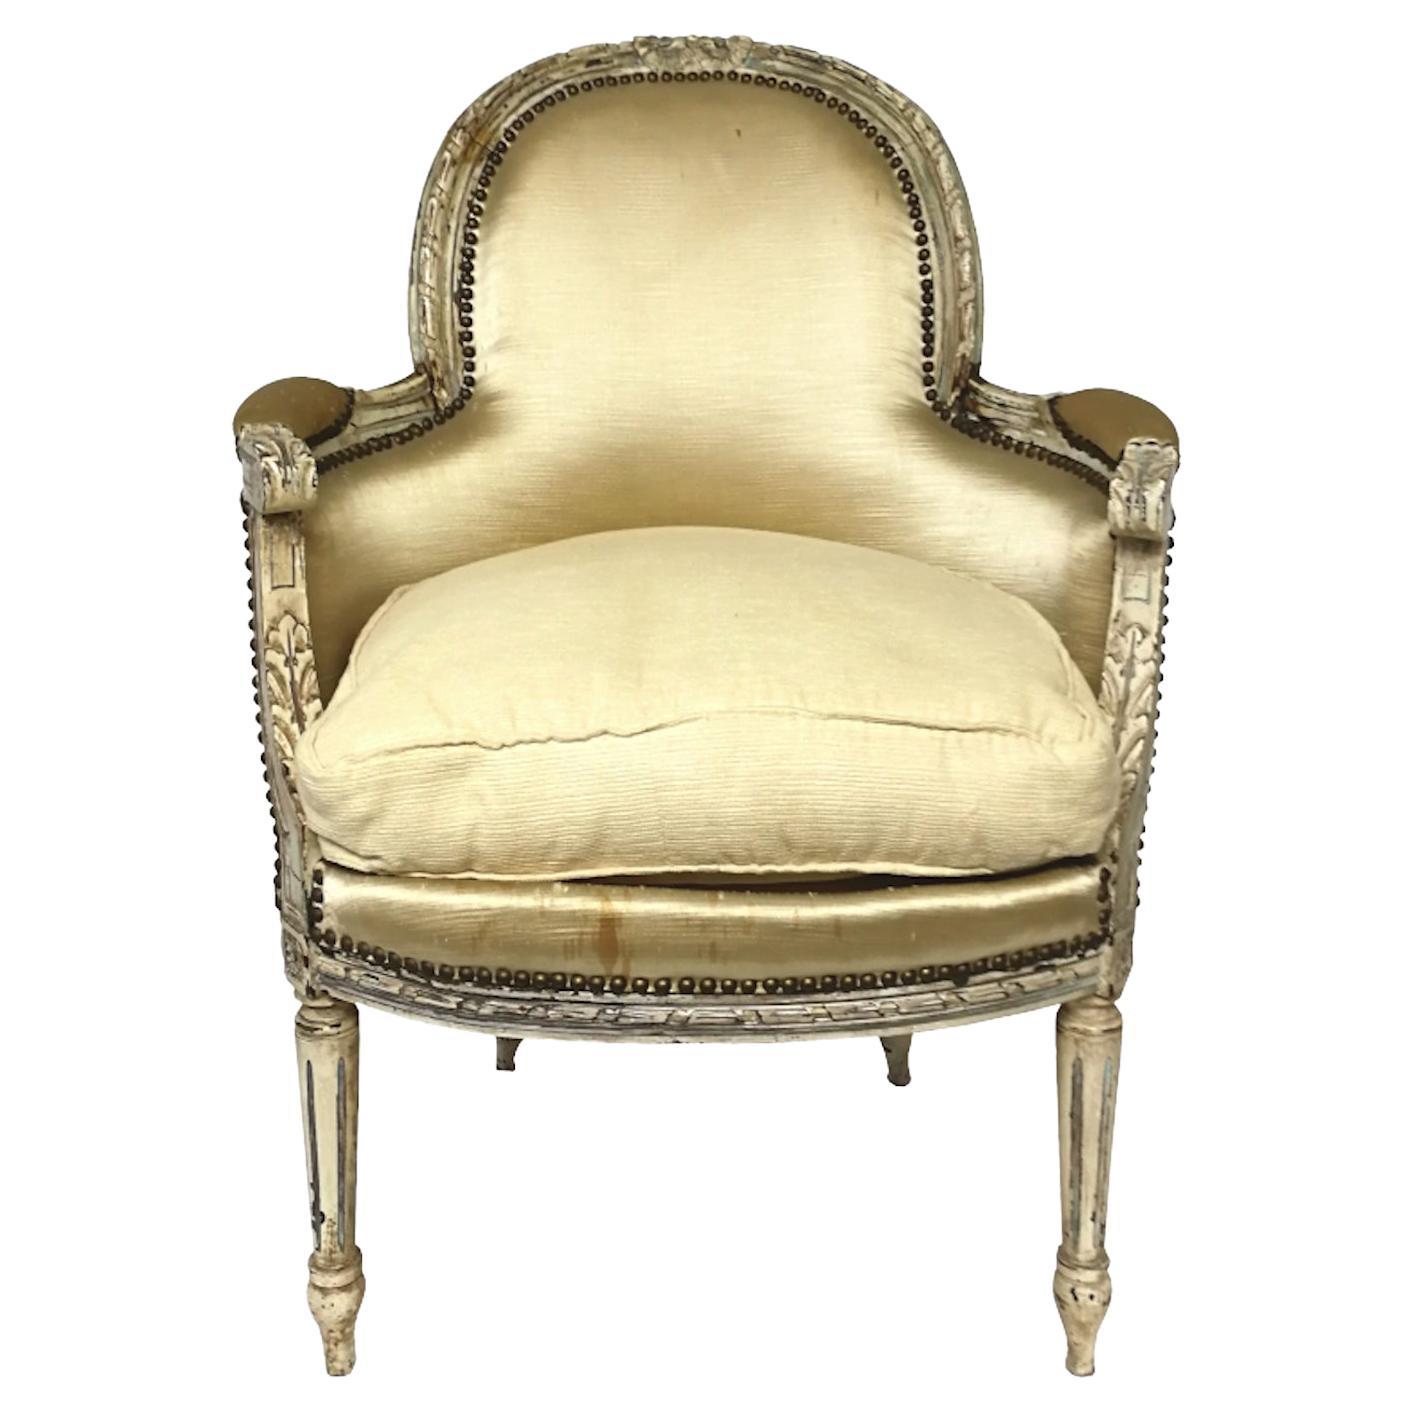 Louis XVI "Bergère" Armchair with Cream Silk Upholster Late 18th Century For Sale